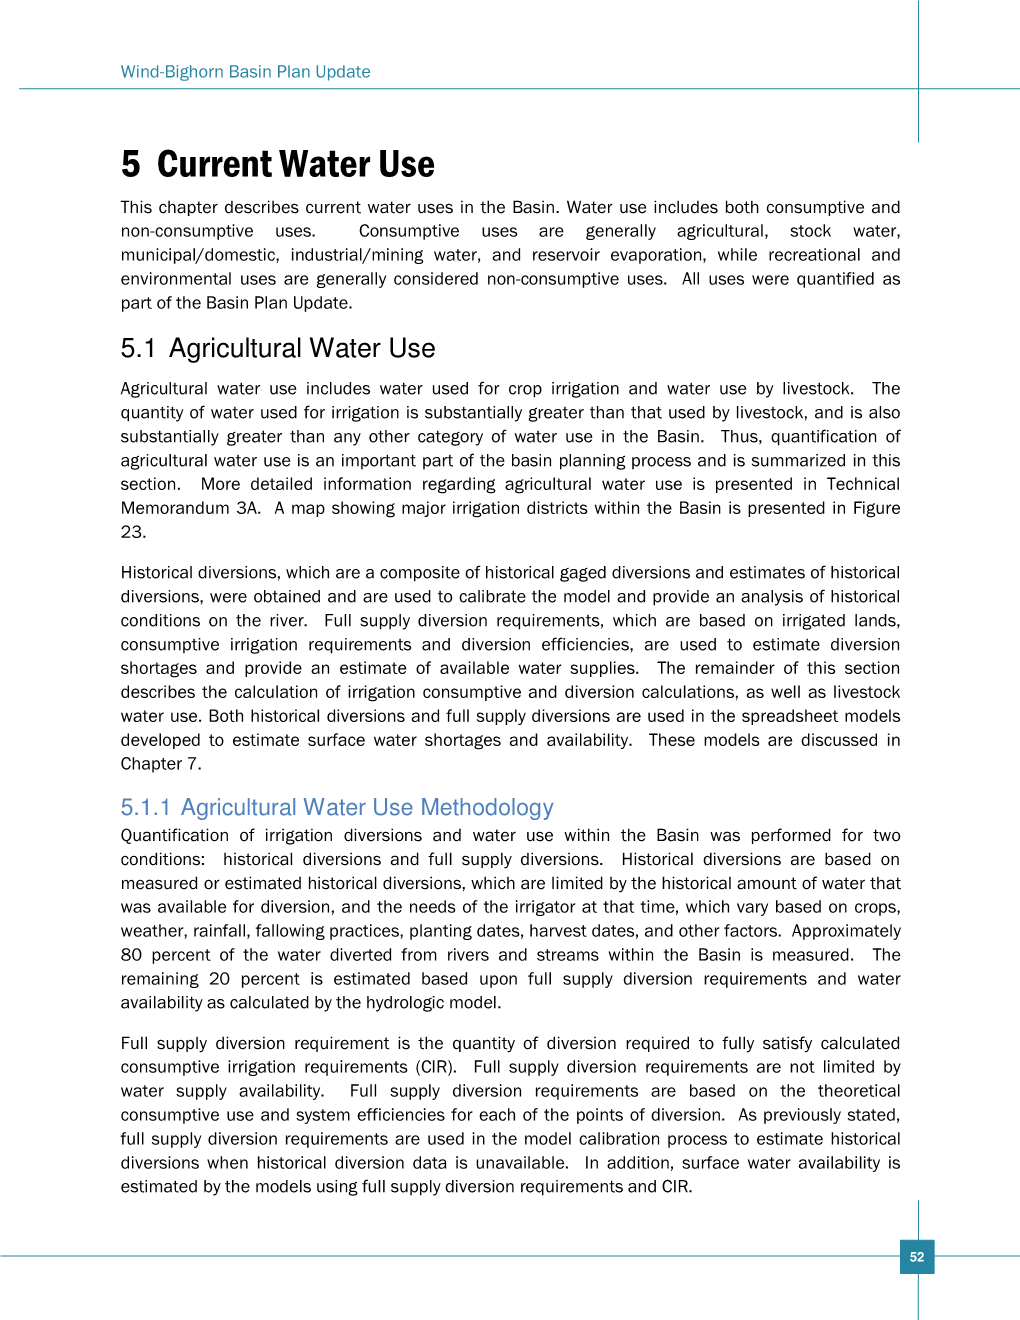 5 Current Water Use This Chapter Describes Current Water Uses in the Basin